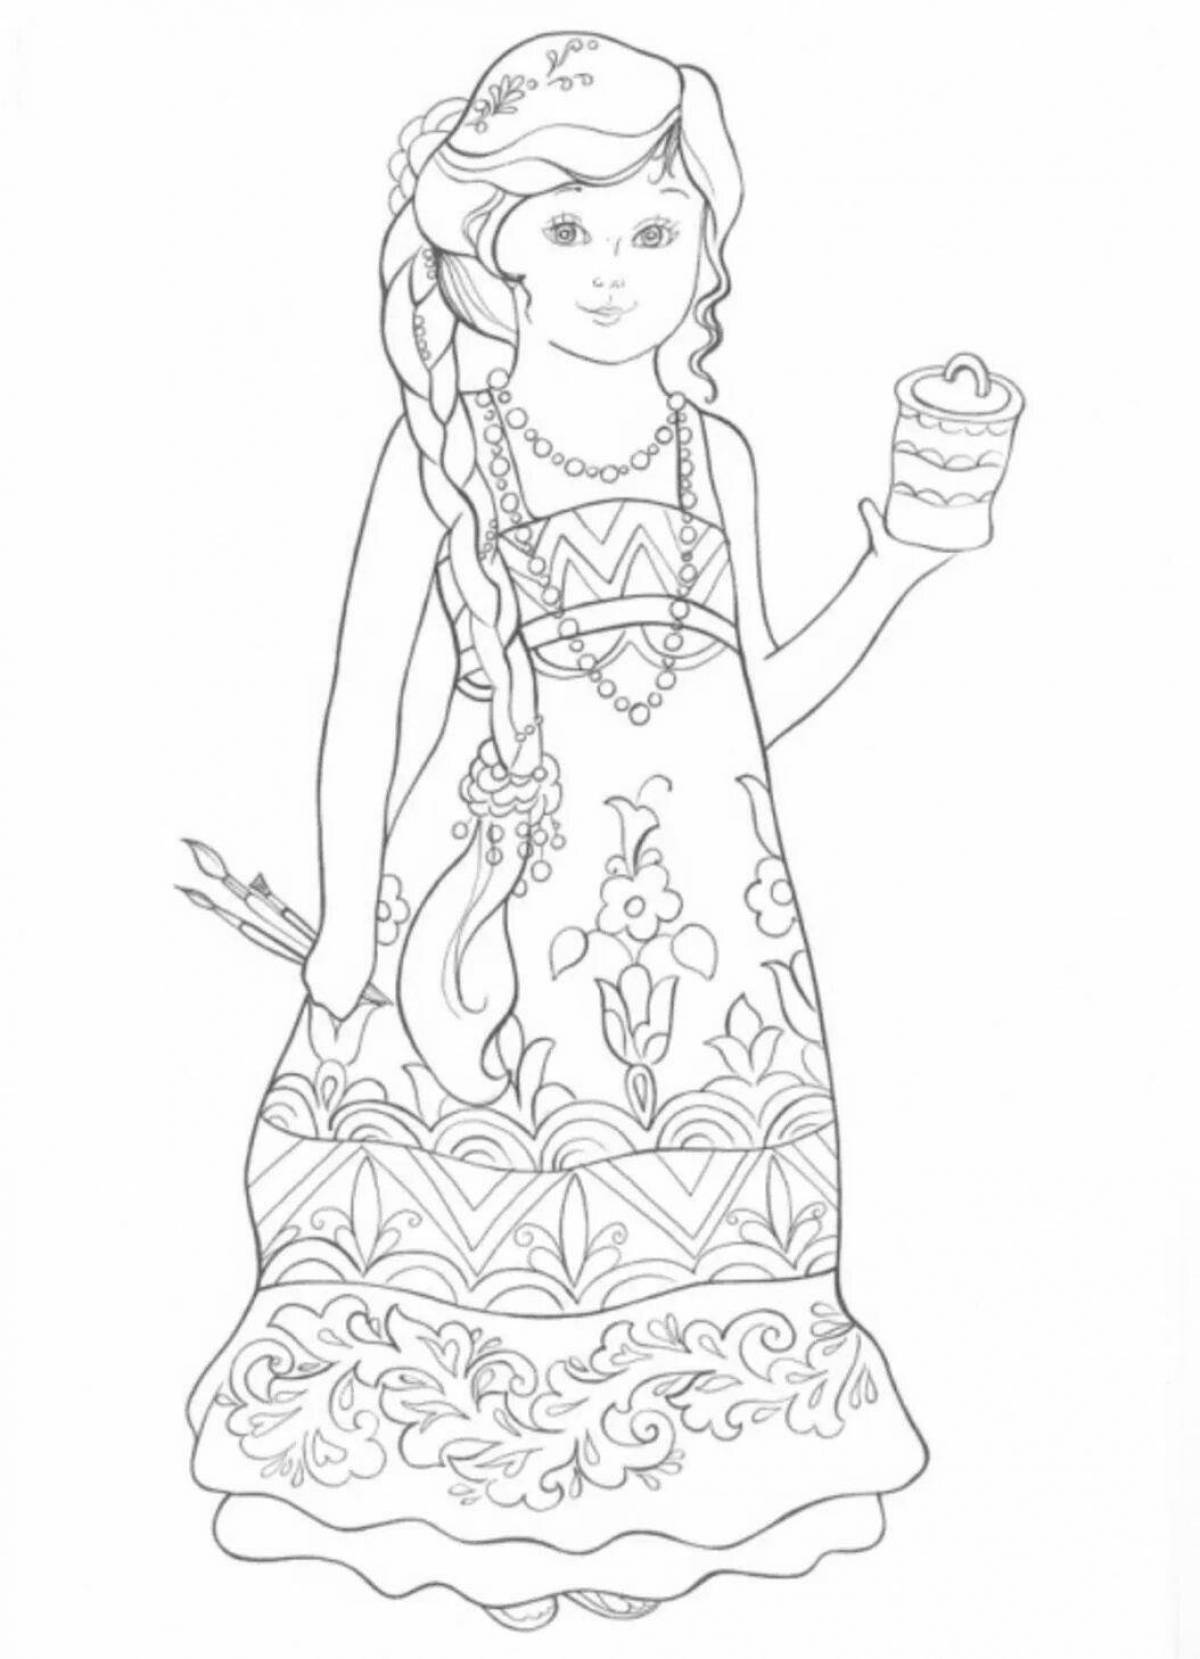 Delightful coloring of the Russian costume for kids